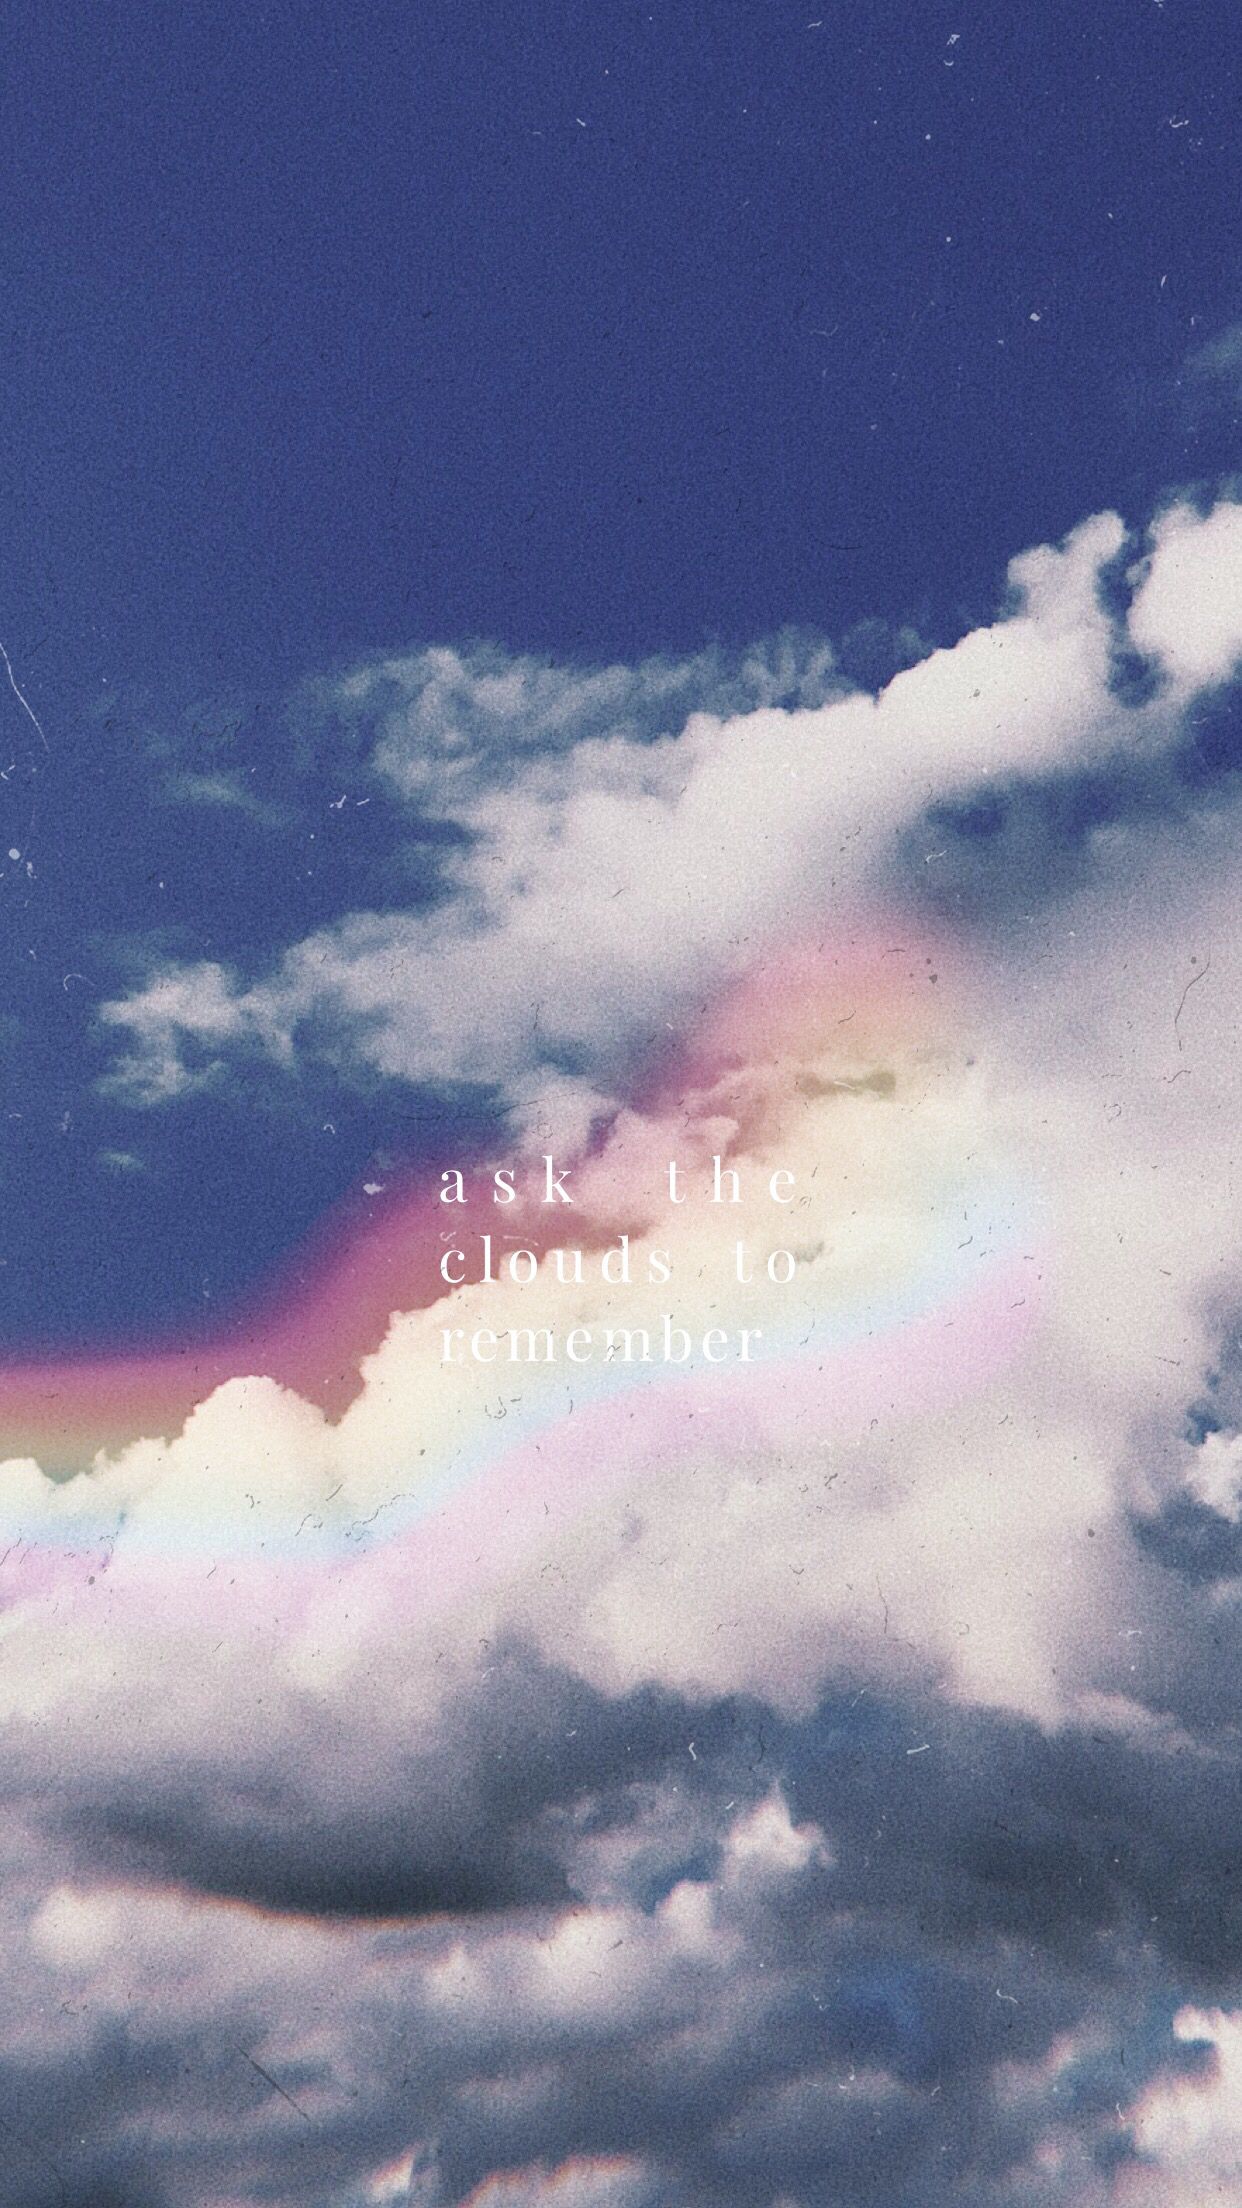 Aesthetic image of a cloudy sky with a rainbow and the words 